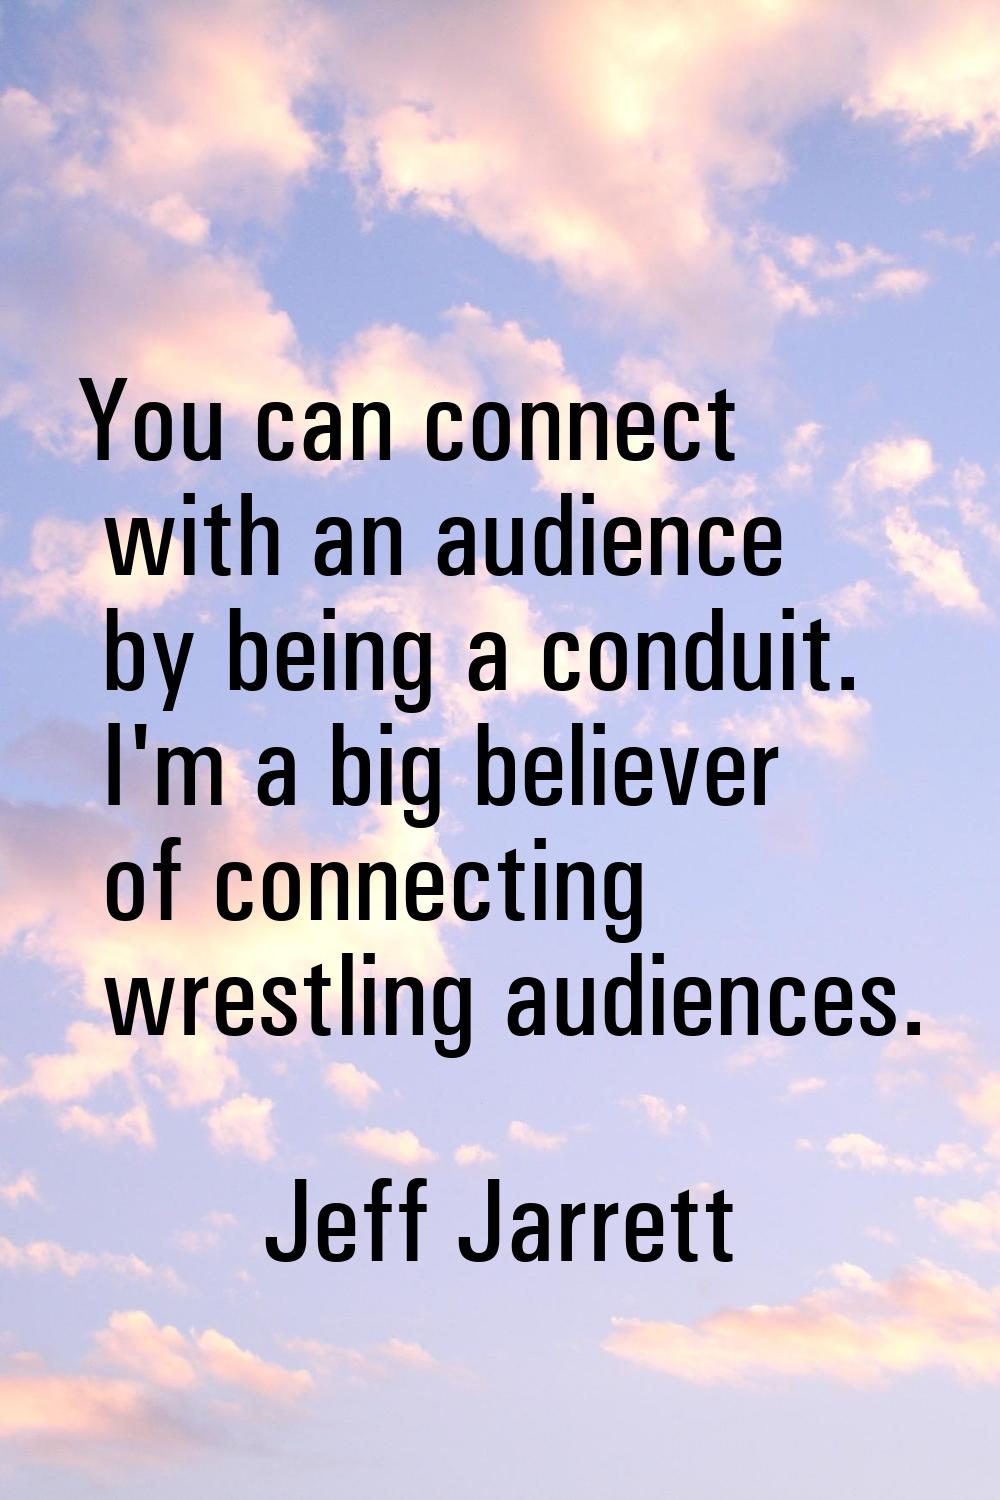 You can connect with an audience by being a conduit. I'm a big believer of connecting wrestling aud